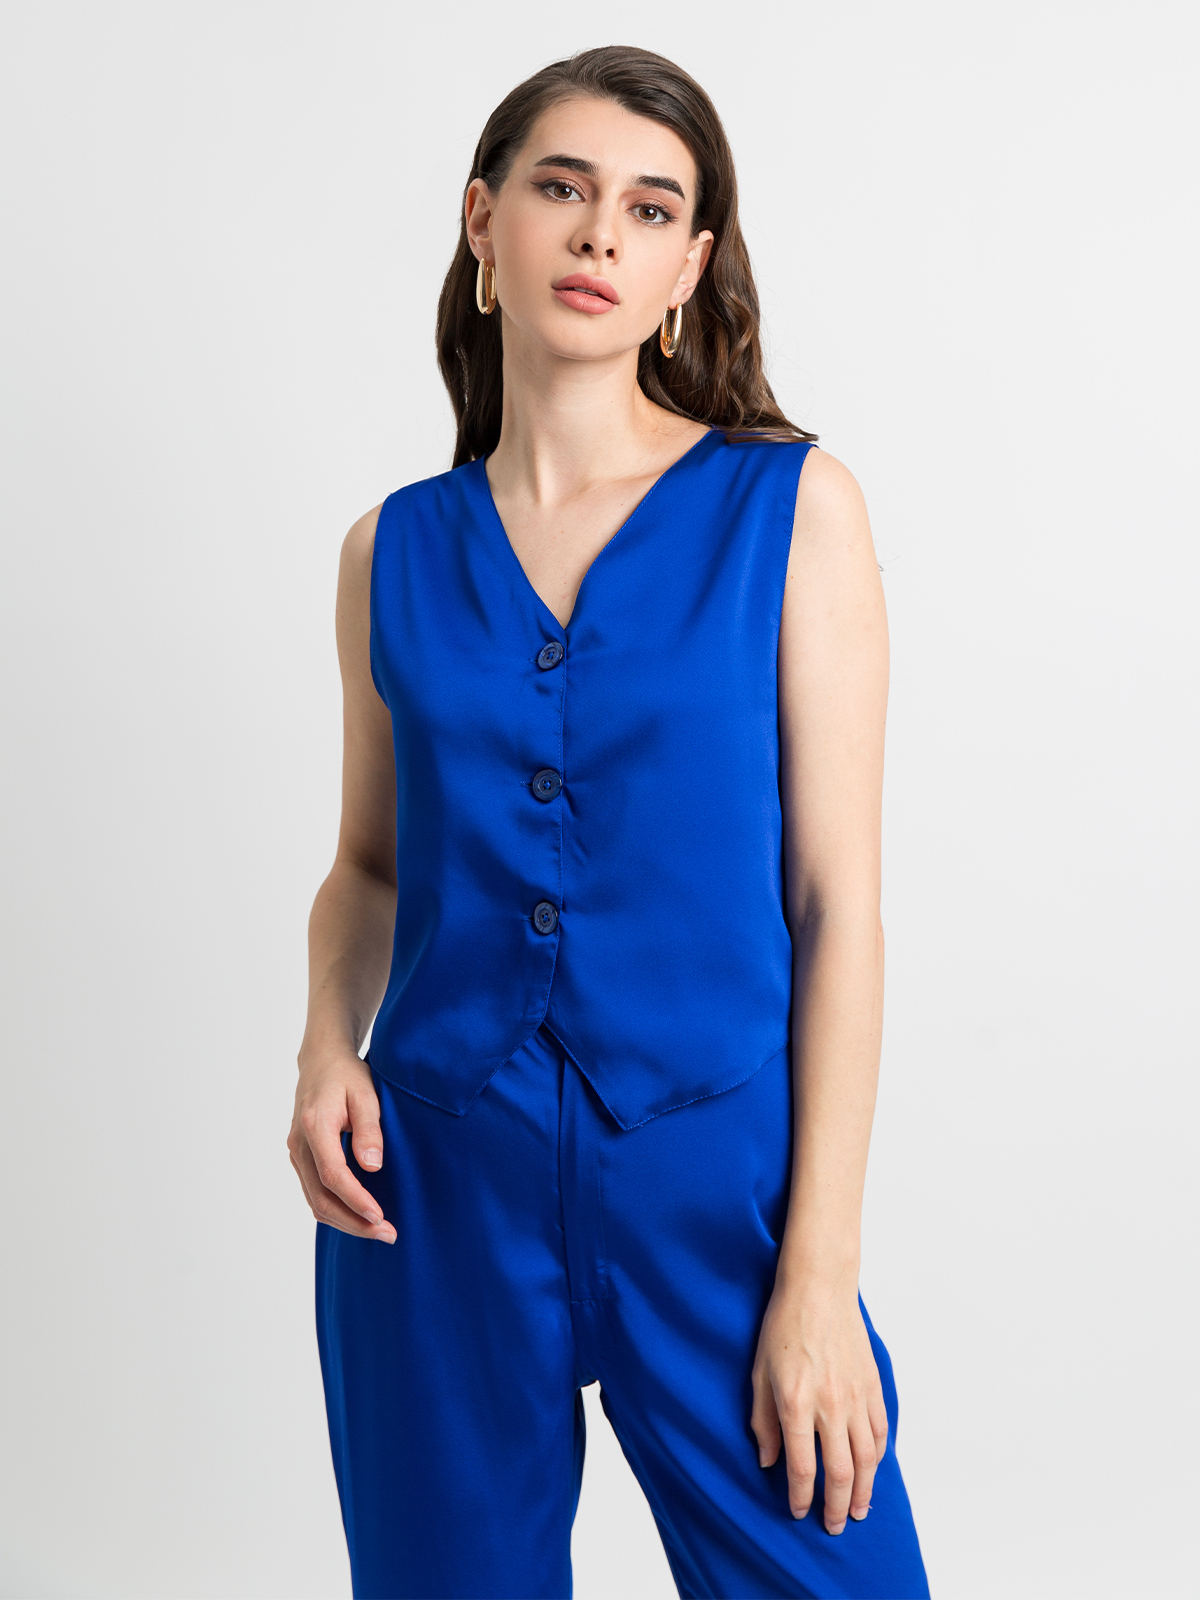 Blue - Flared Pants With Vest Set in Soft & Silky-feel Fabric